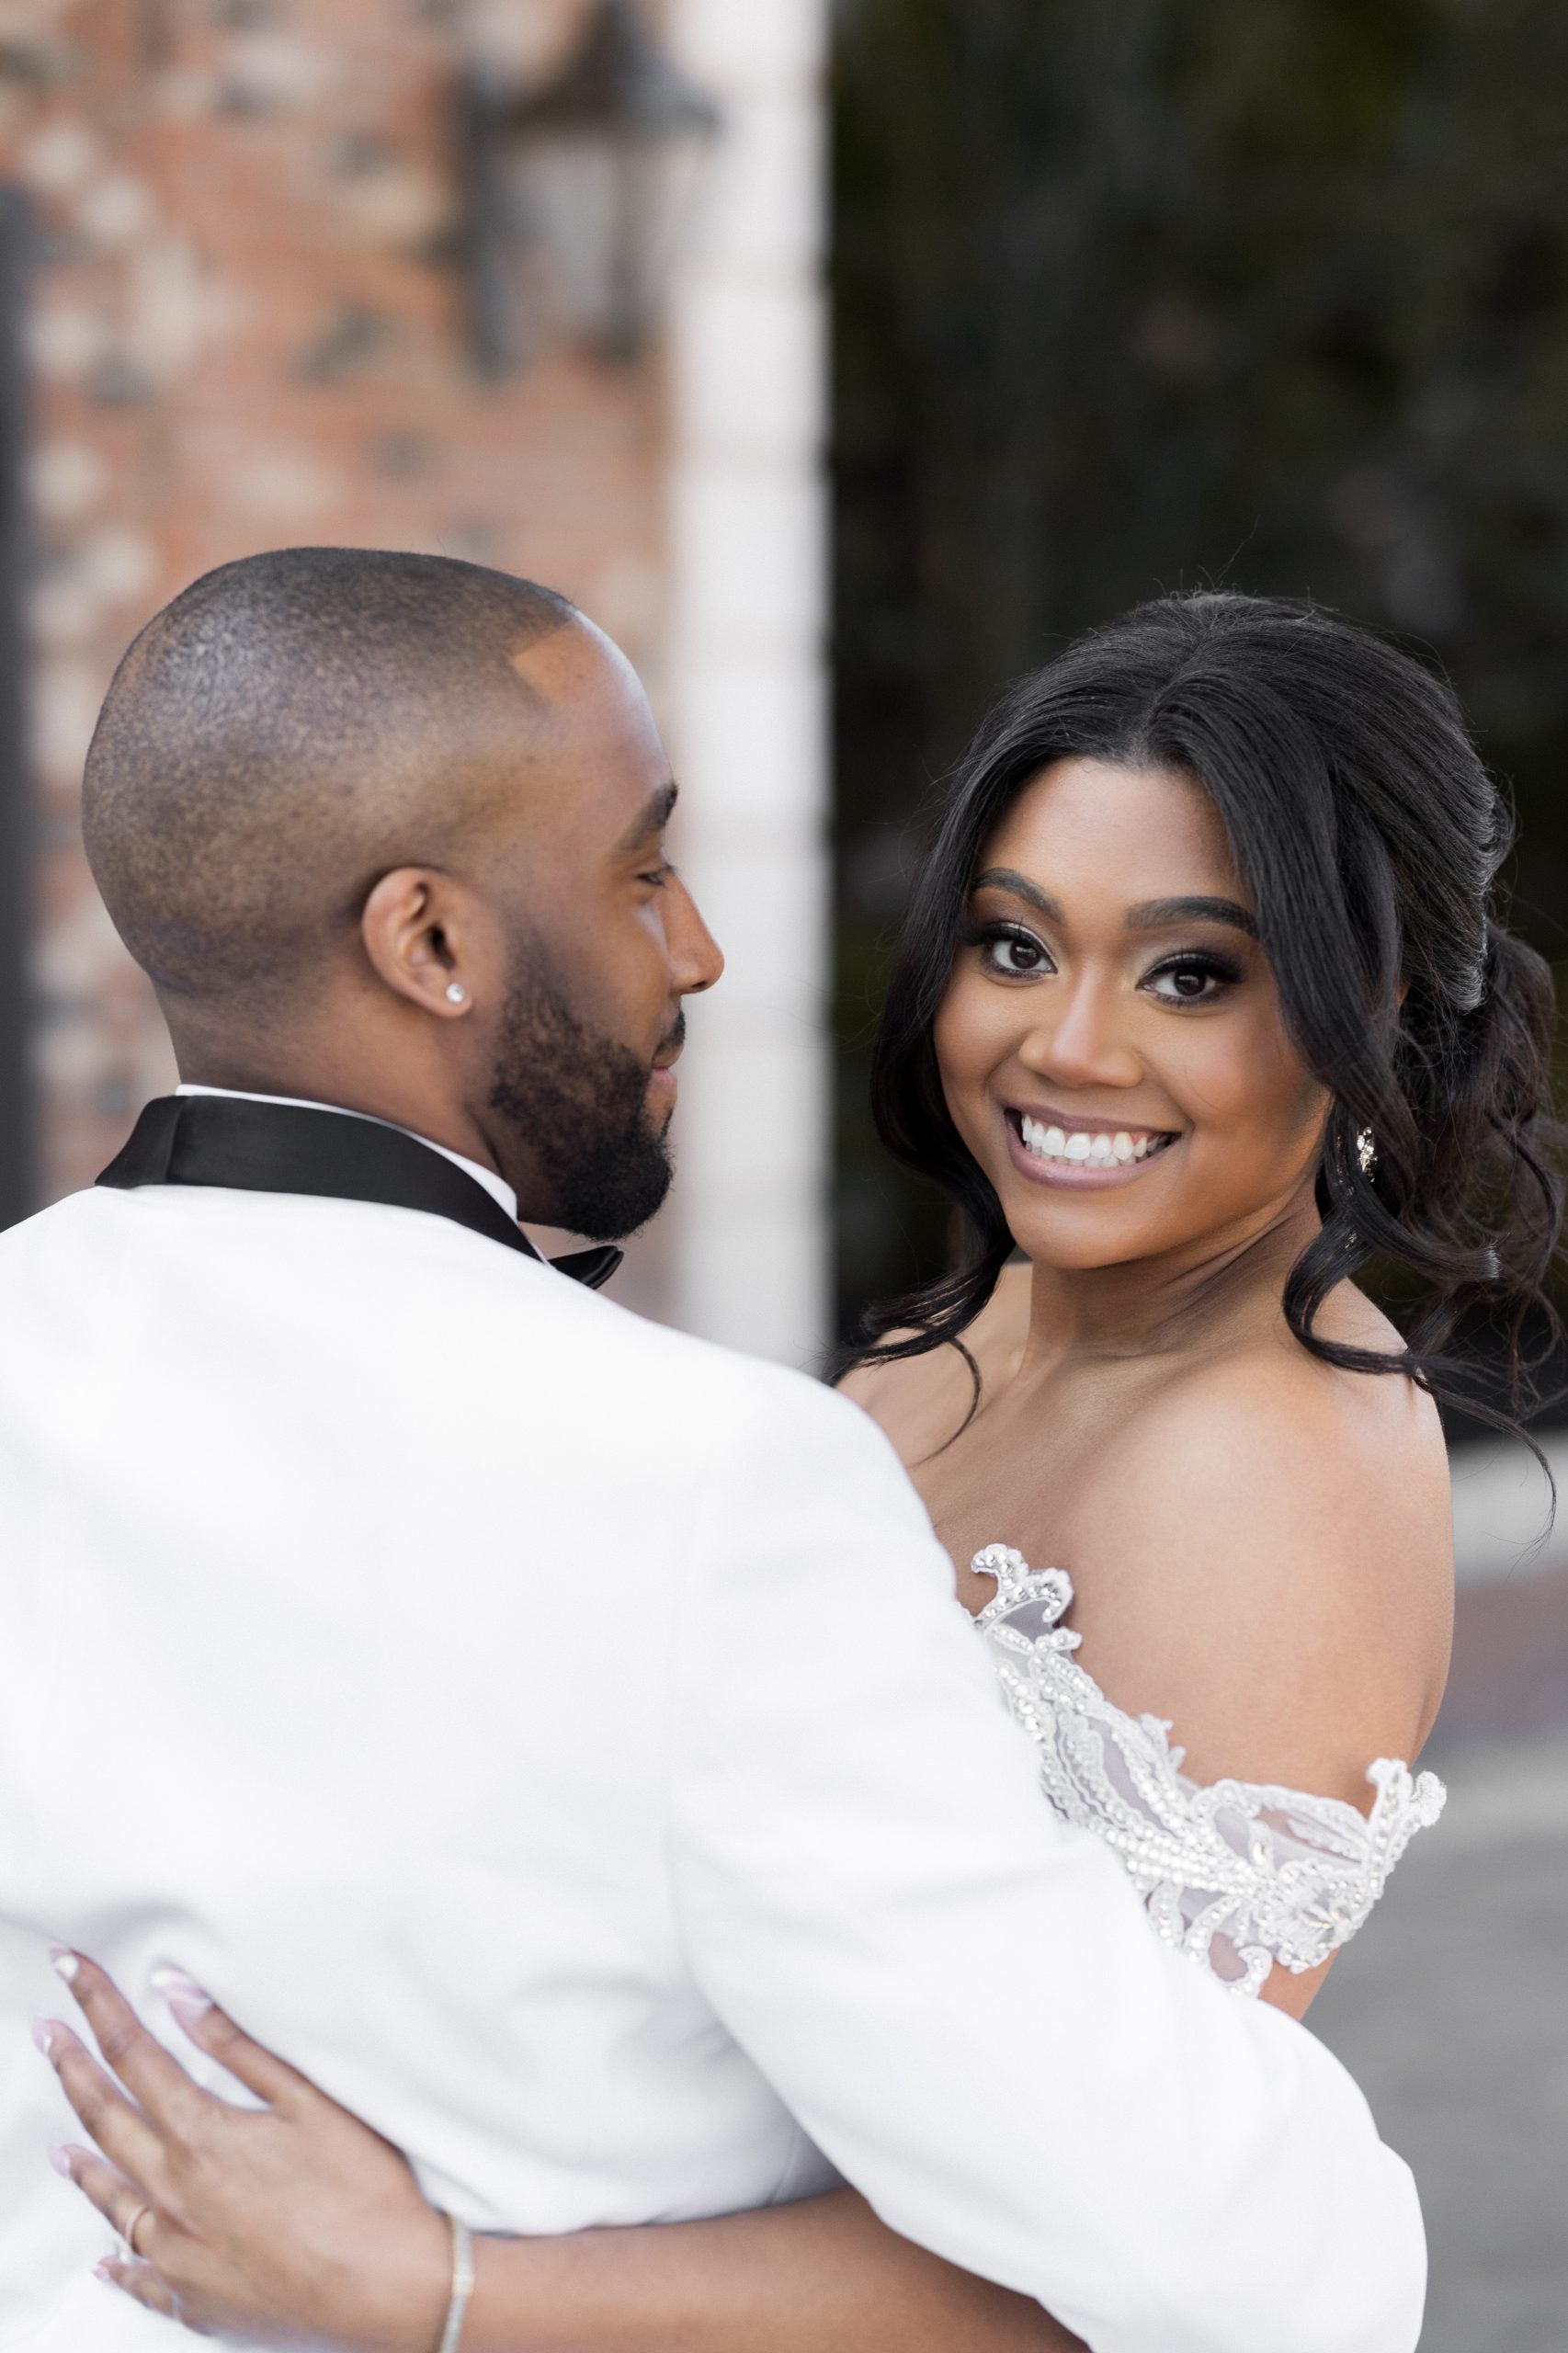 Bridal Bliss: Erica And Kaalen's New Jersey Nuptials Were Nothing Short Of Magical